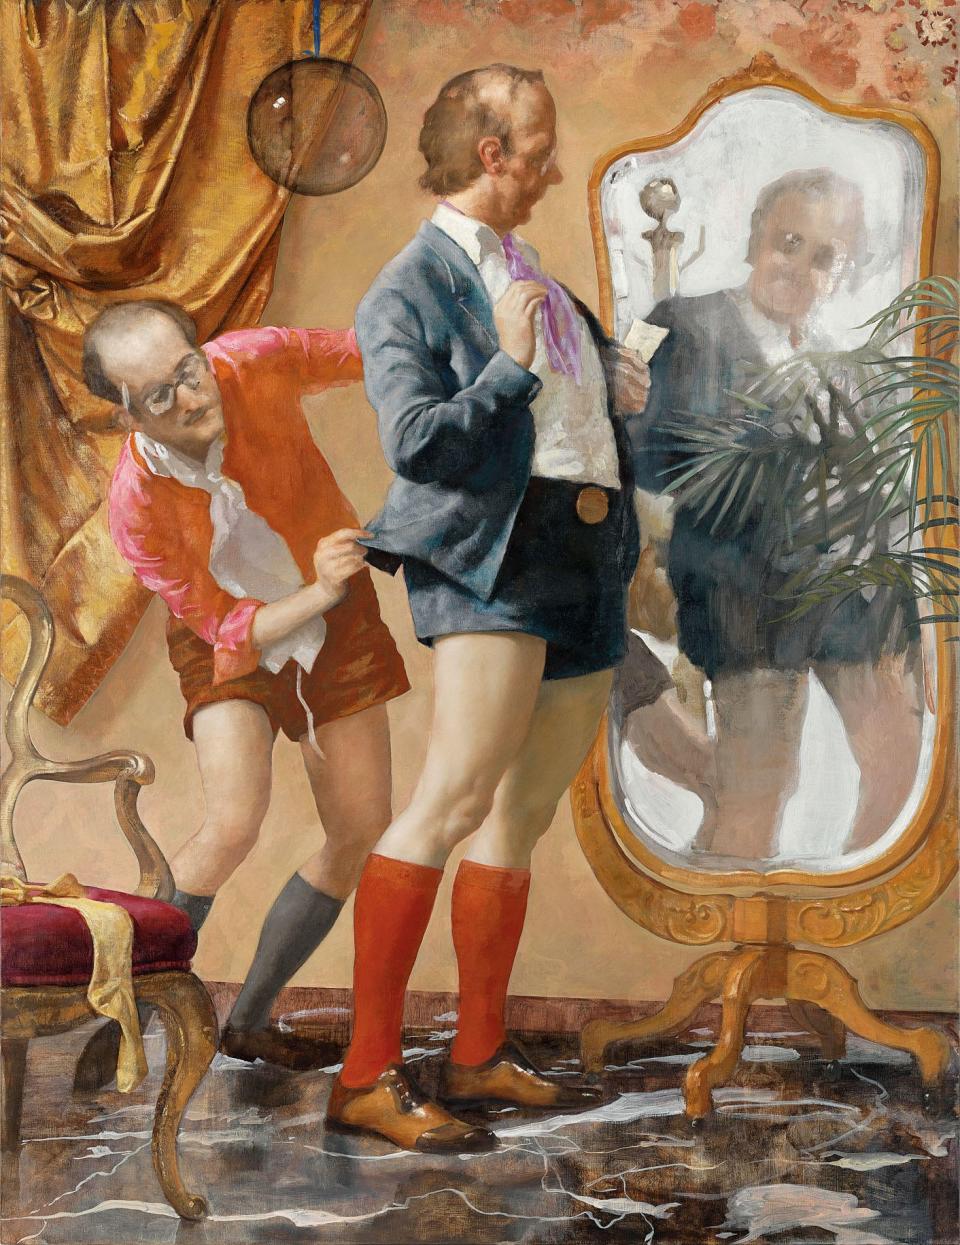 The terrific painting Hot Pants, from 2010. Oil on canvas. It was inspired by a very dated image, he said, “of these fake stupid men, clowns, following the whims of whatever.”